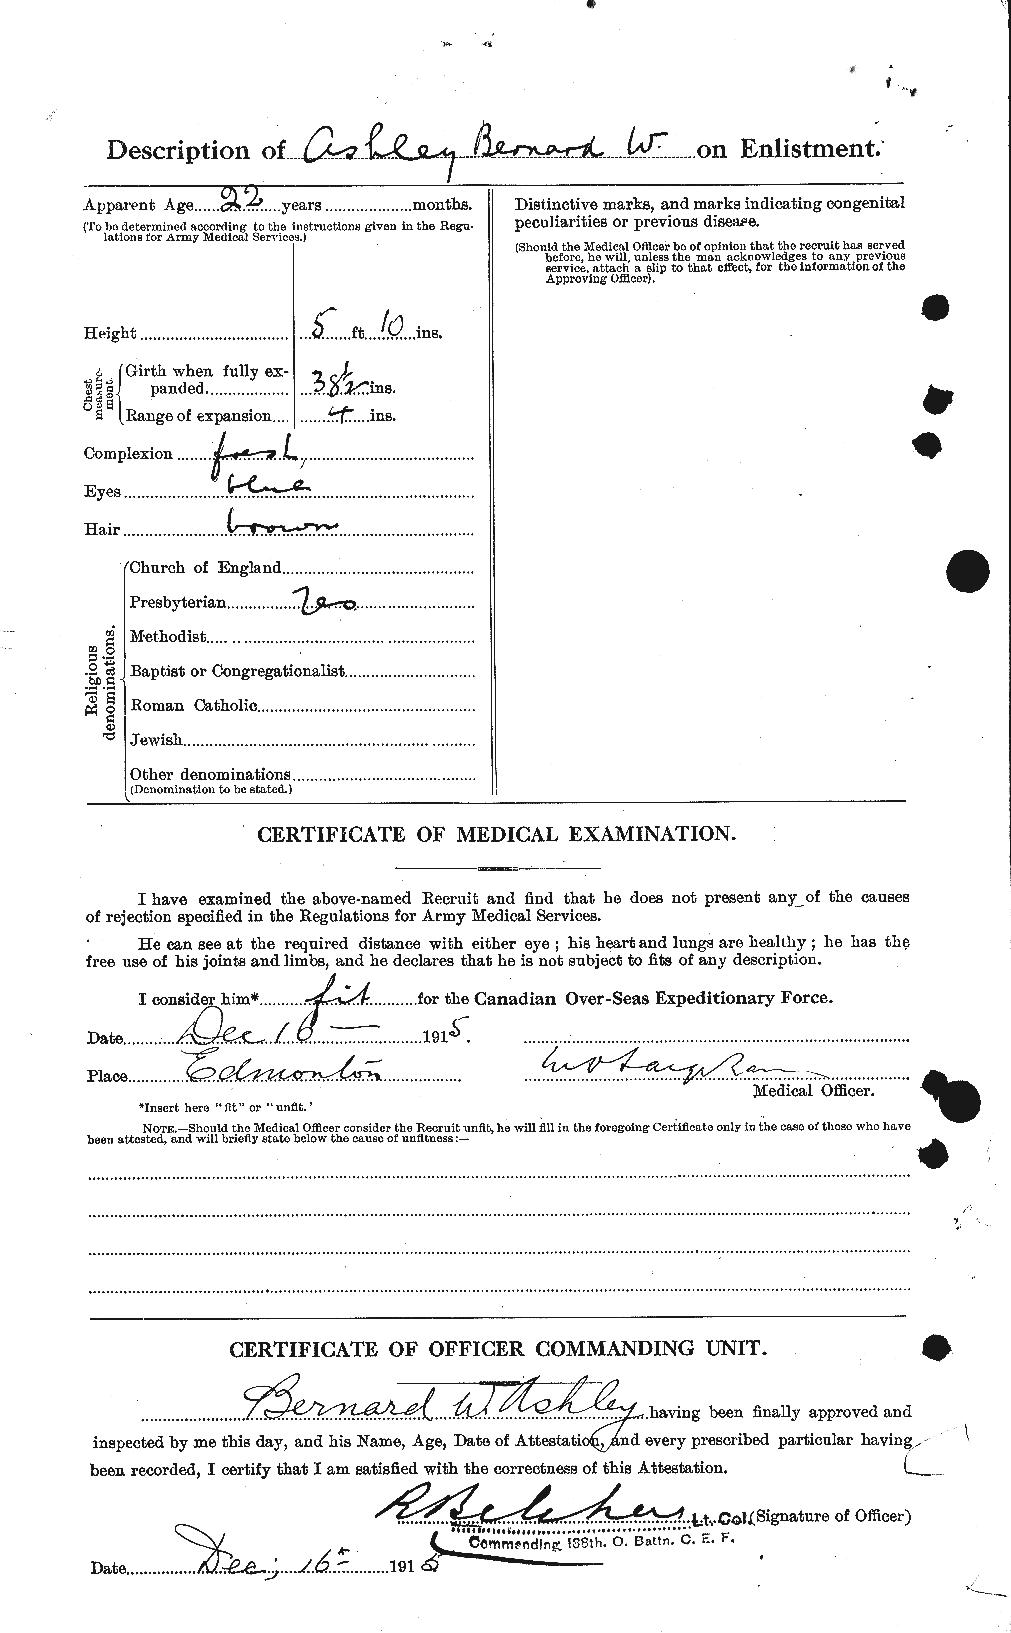 Personnel Records of the First World War - CEF 223219b